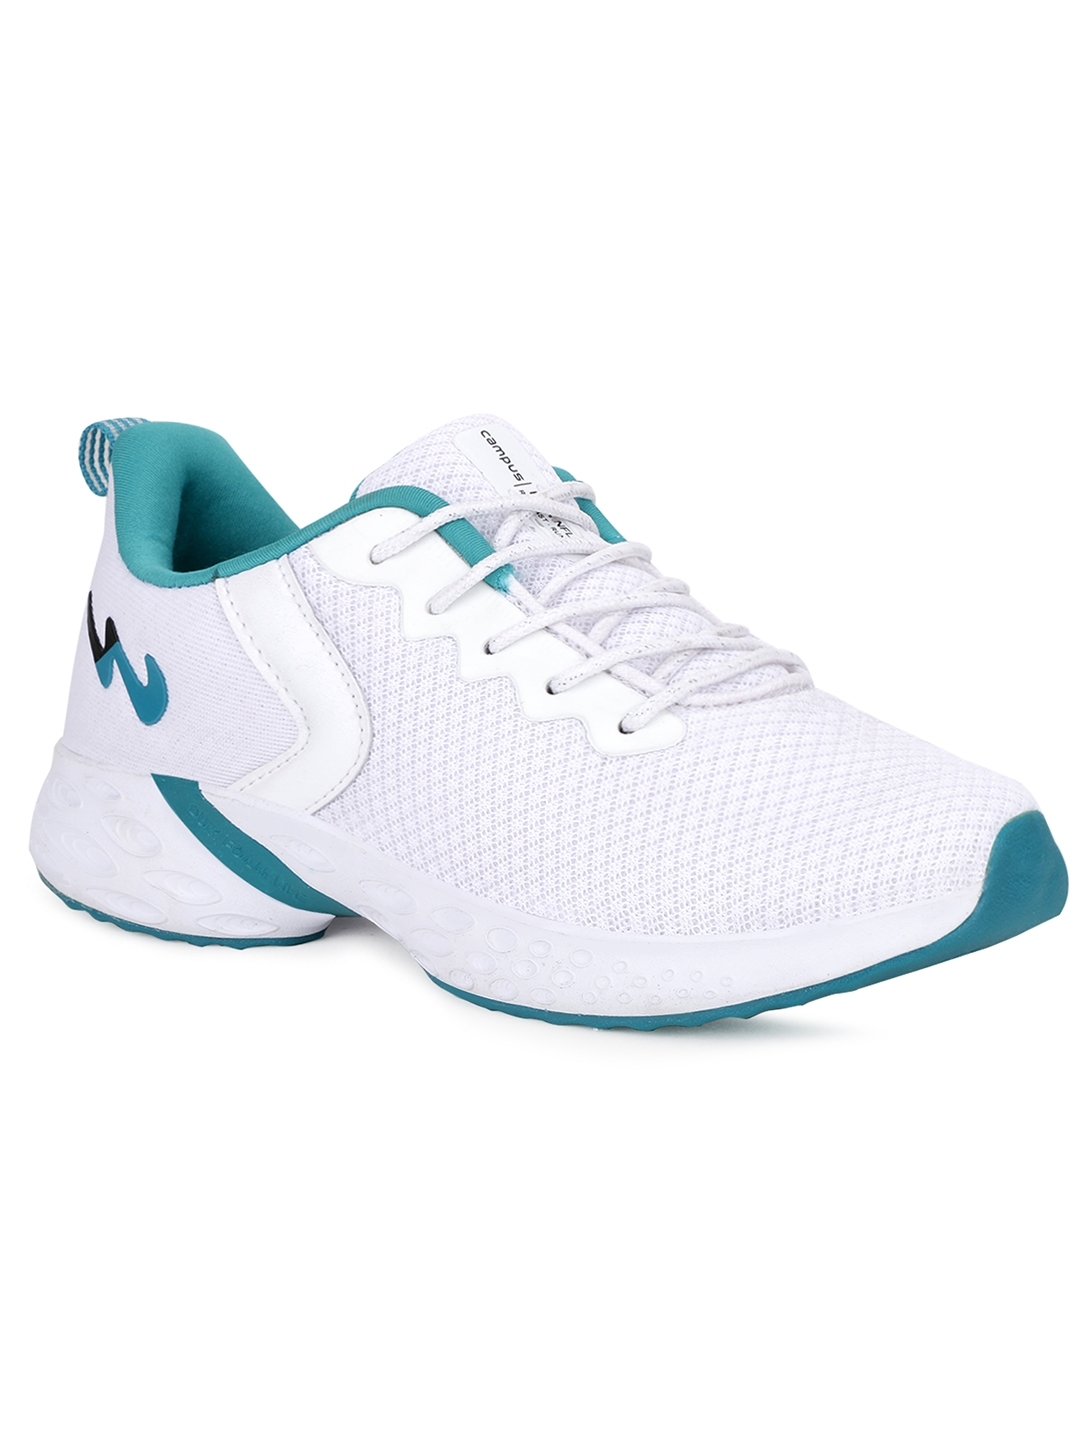 Campus Shoes | White Alice Running Shoes